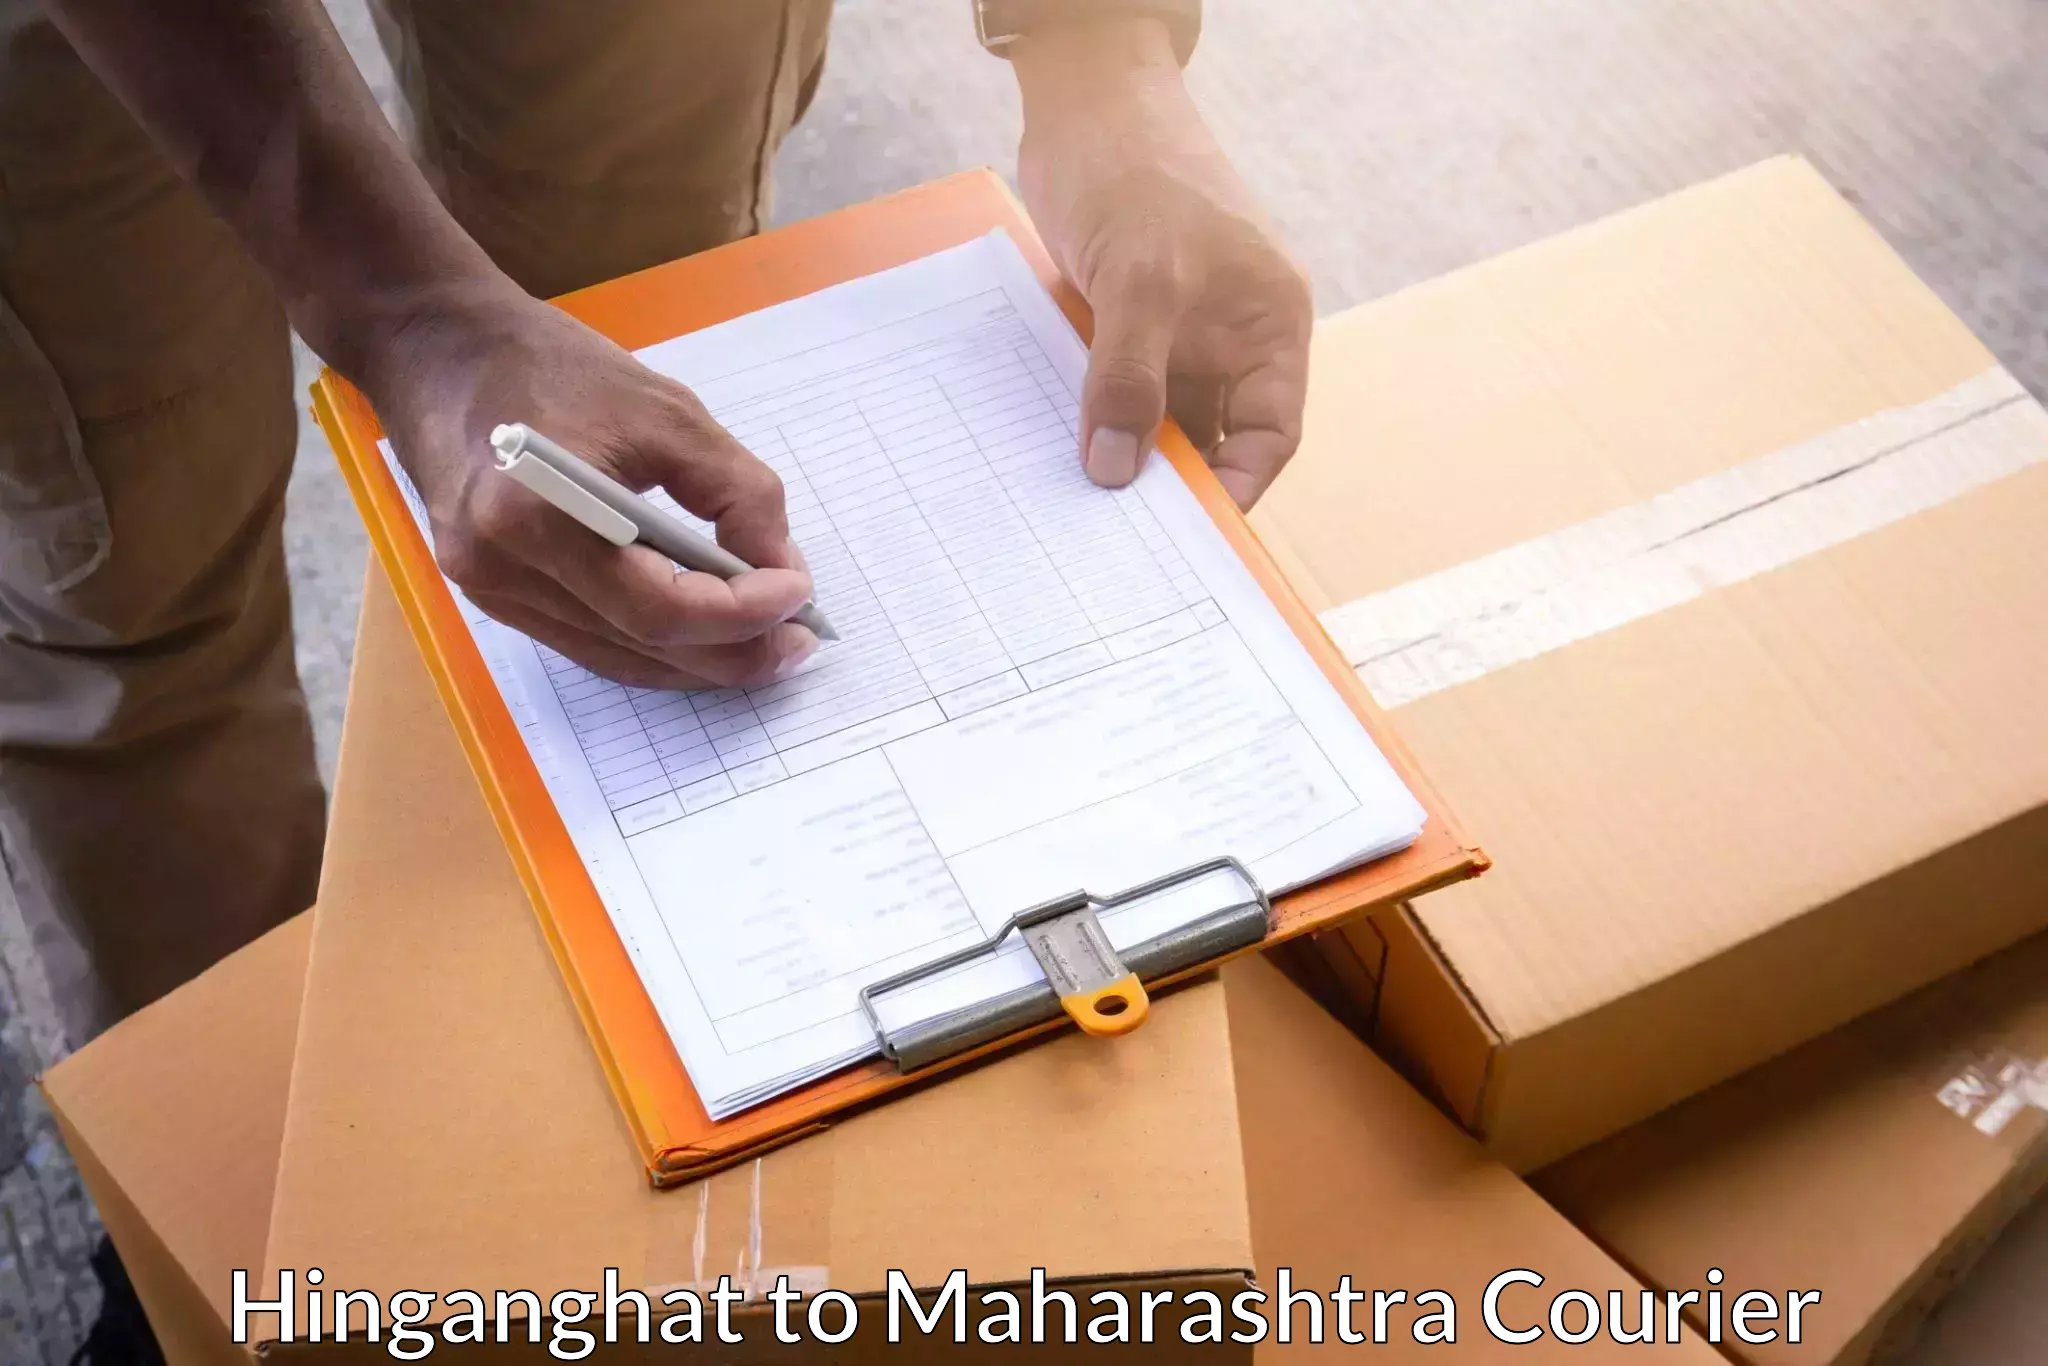 24-hour courier service in Hinganghat to Baramati